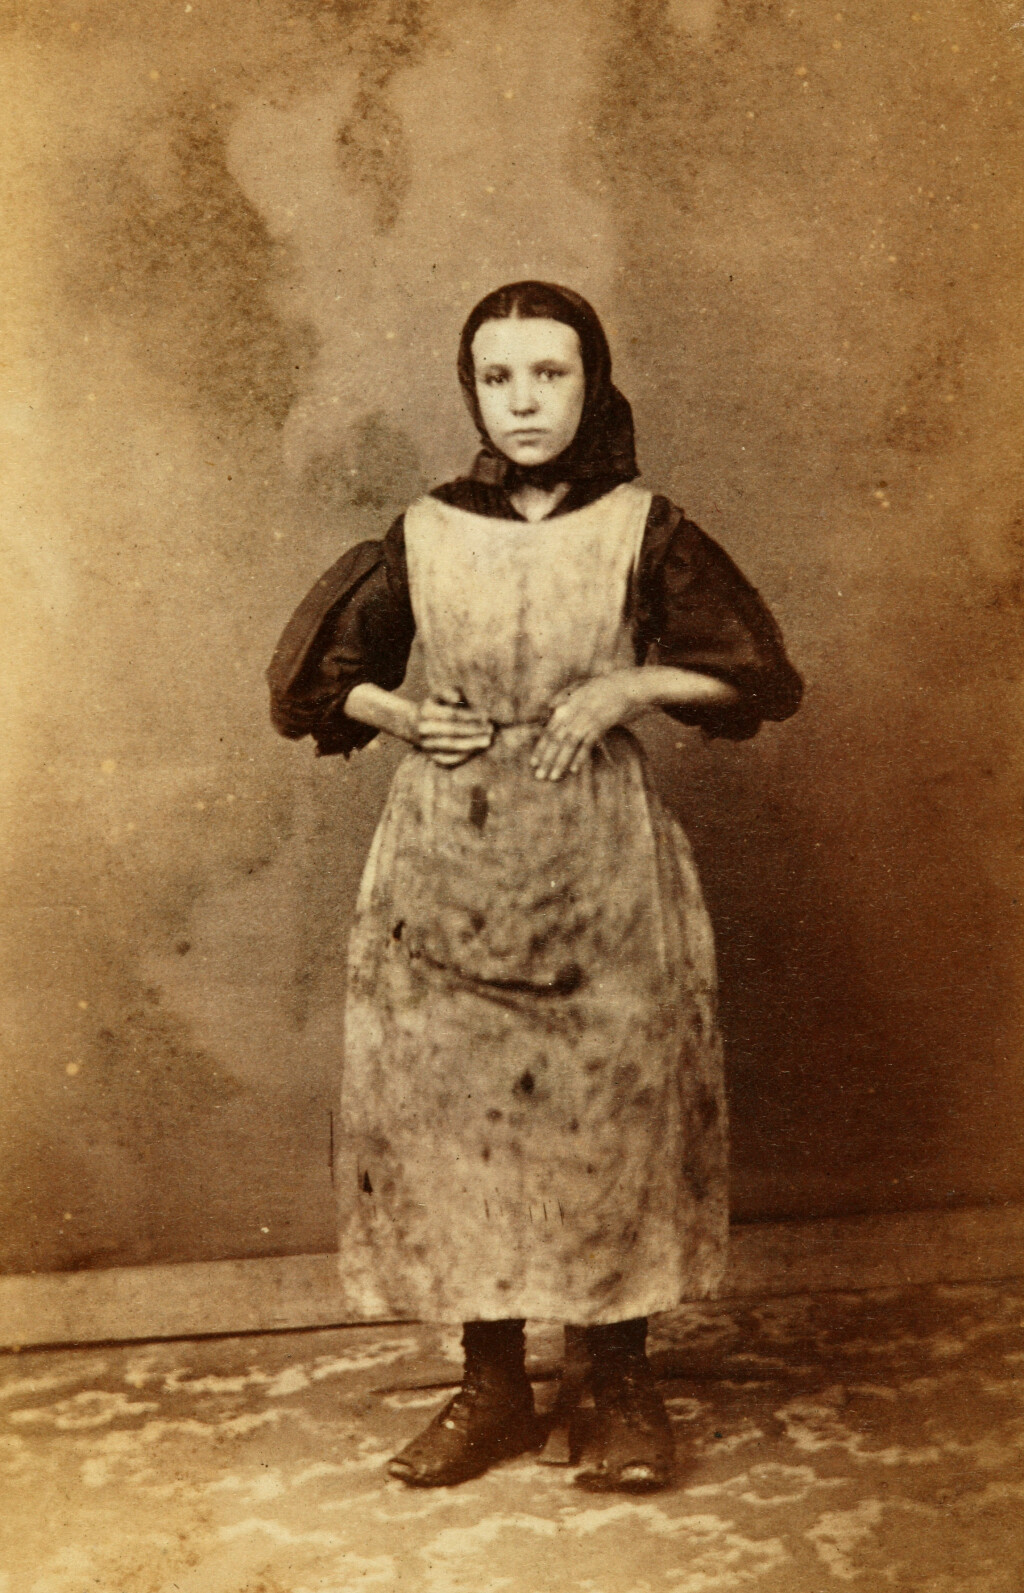 Old picture of a young woman standing with hands on hips while wearing a dirty apron and flared shirt underneath. 